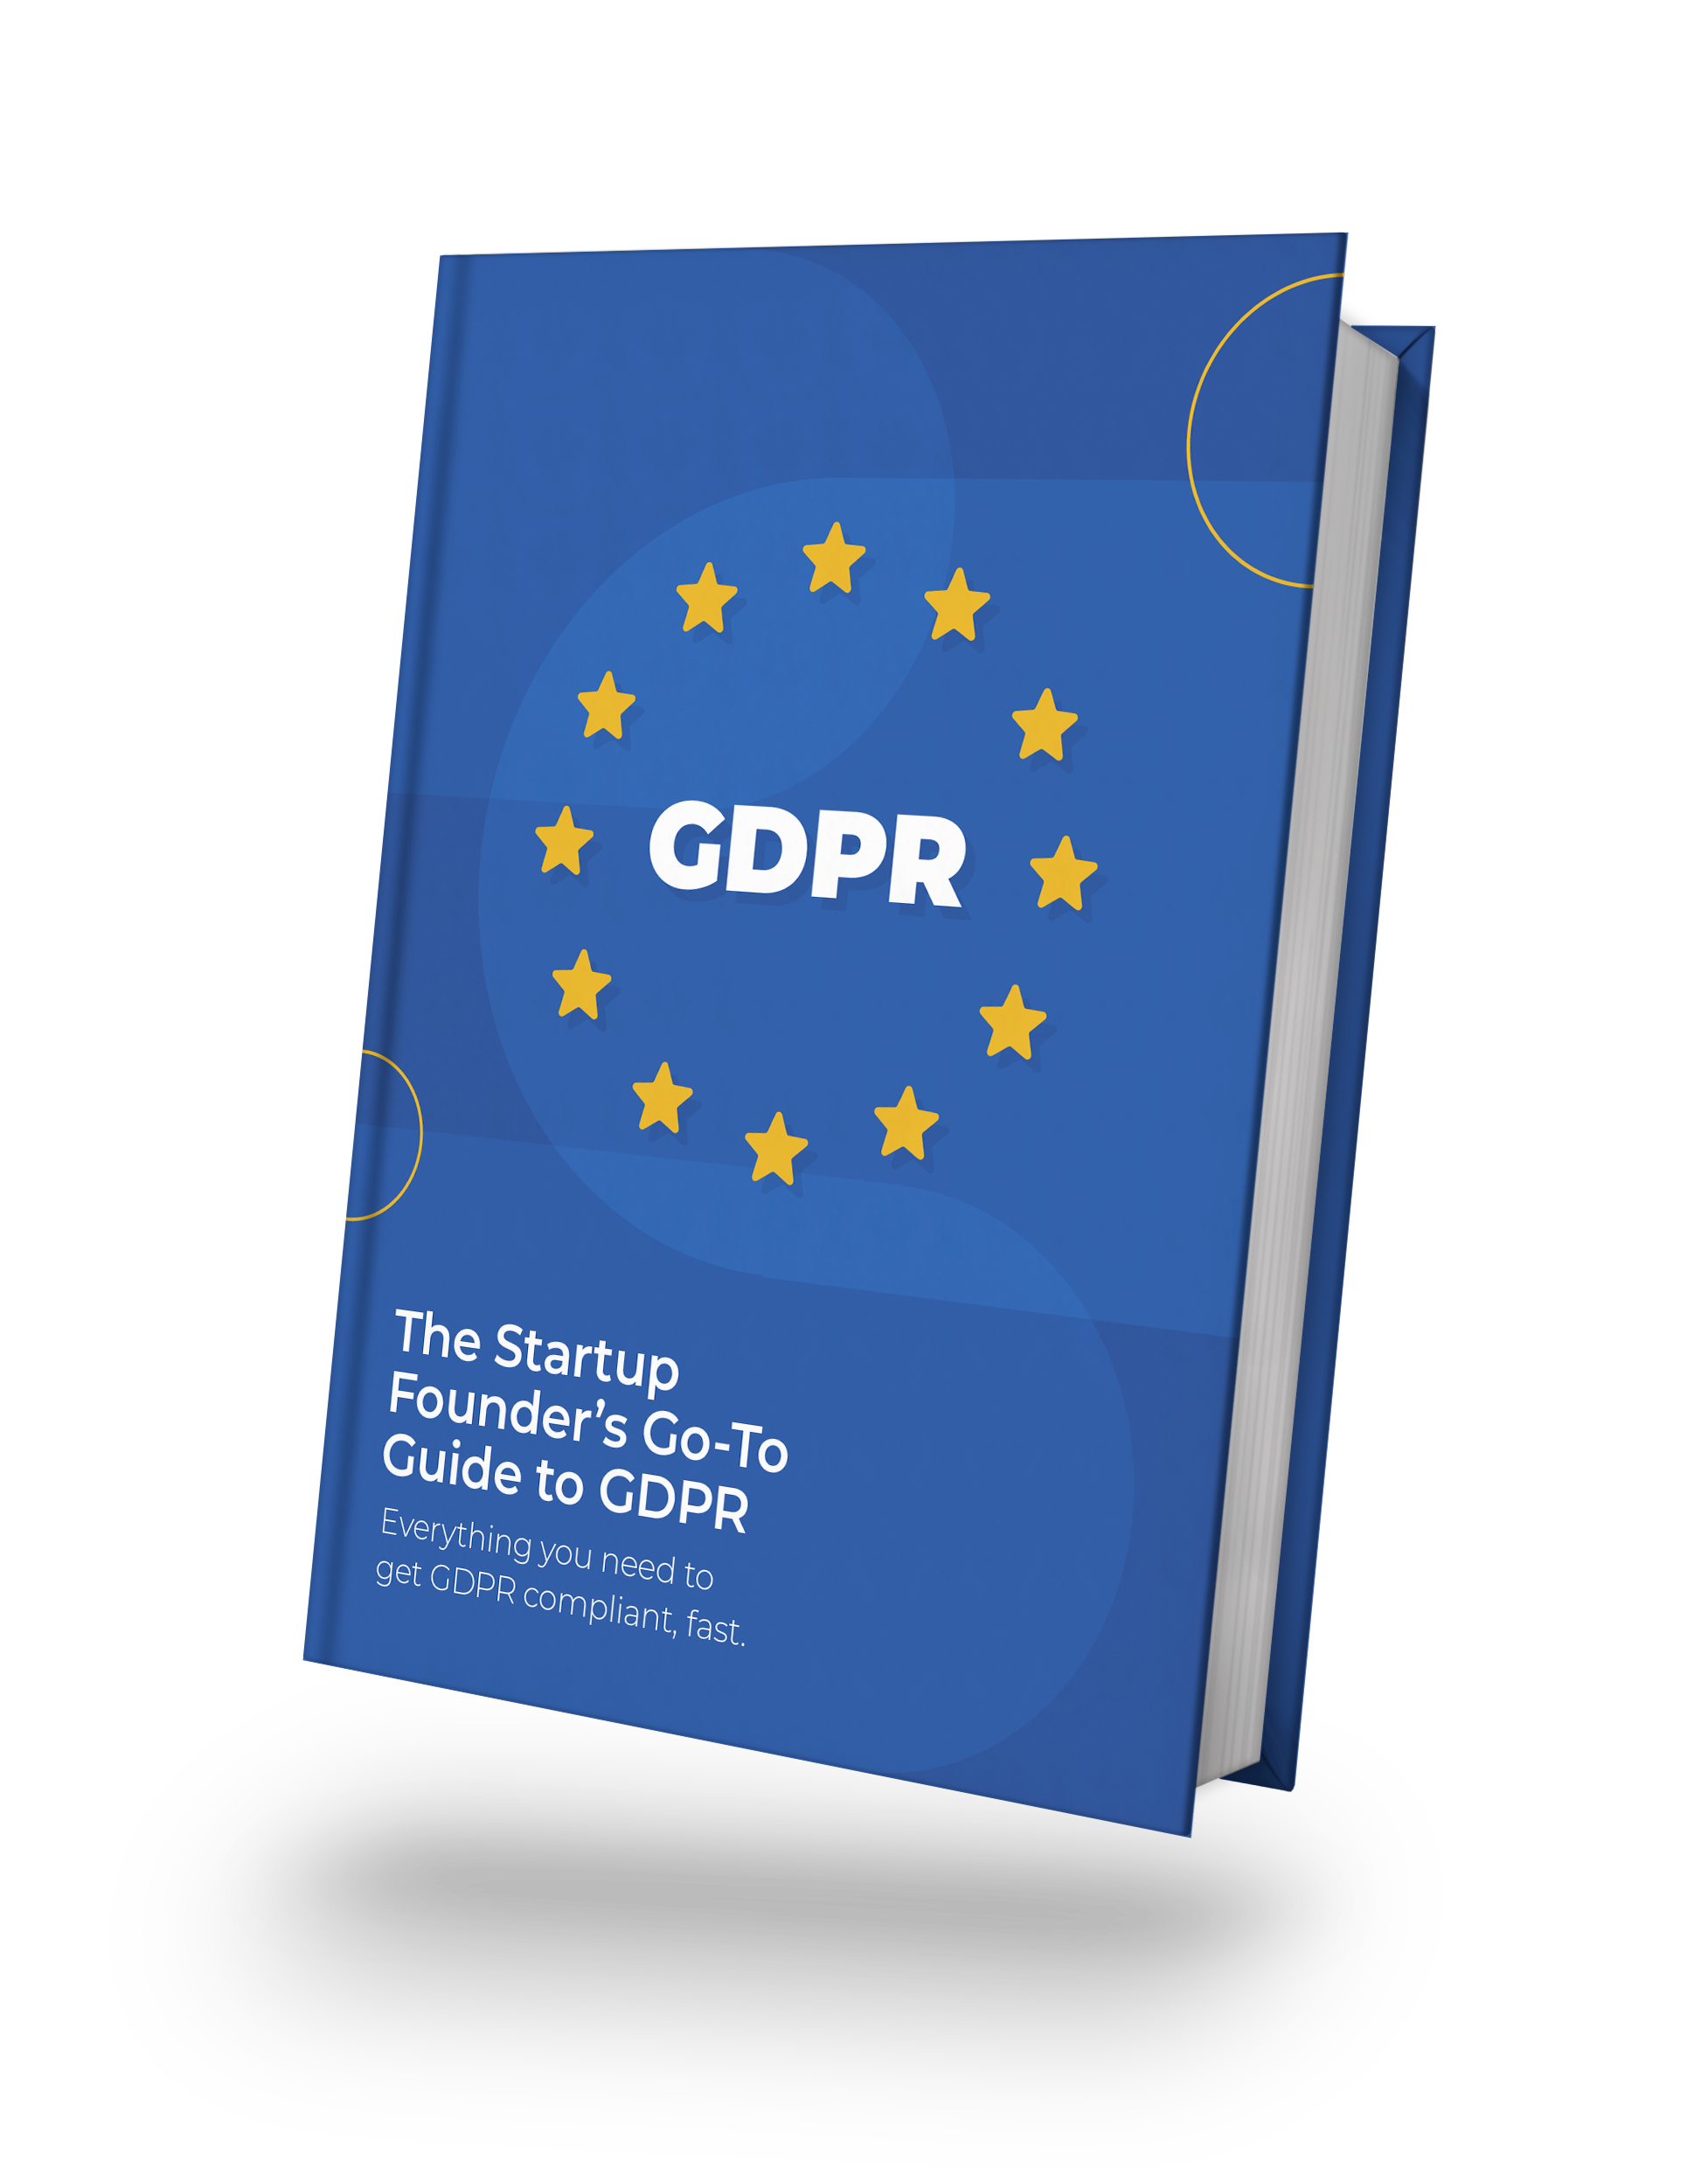 THE STARTUP FOUNDER’S GO-TO GUIDE TO GDPR